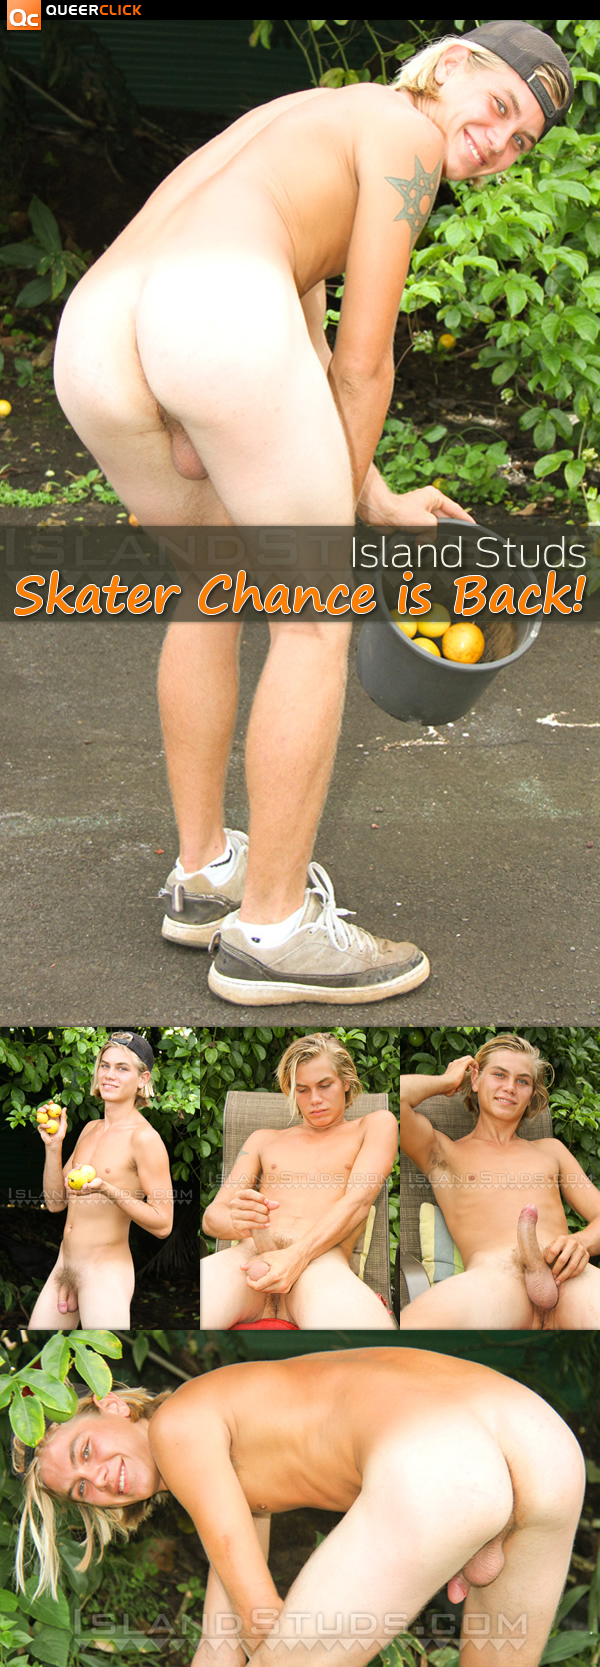 Island Studs: Skater Chance is Back!